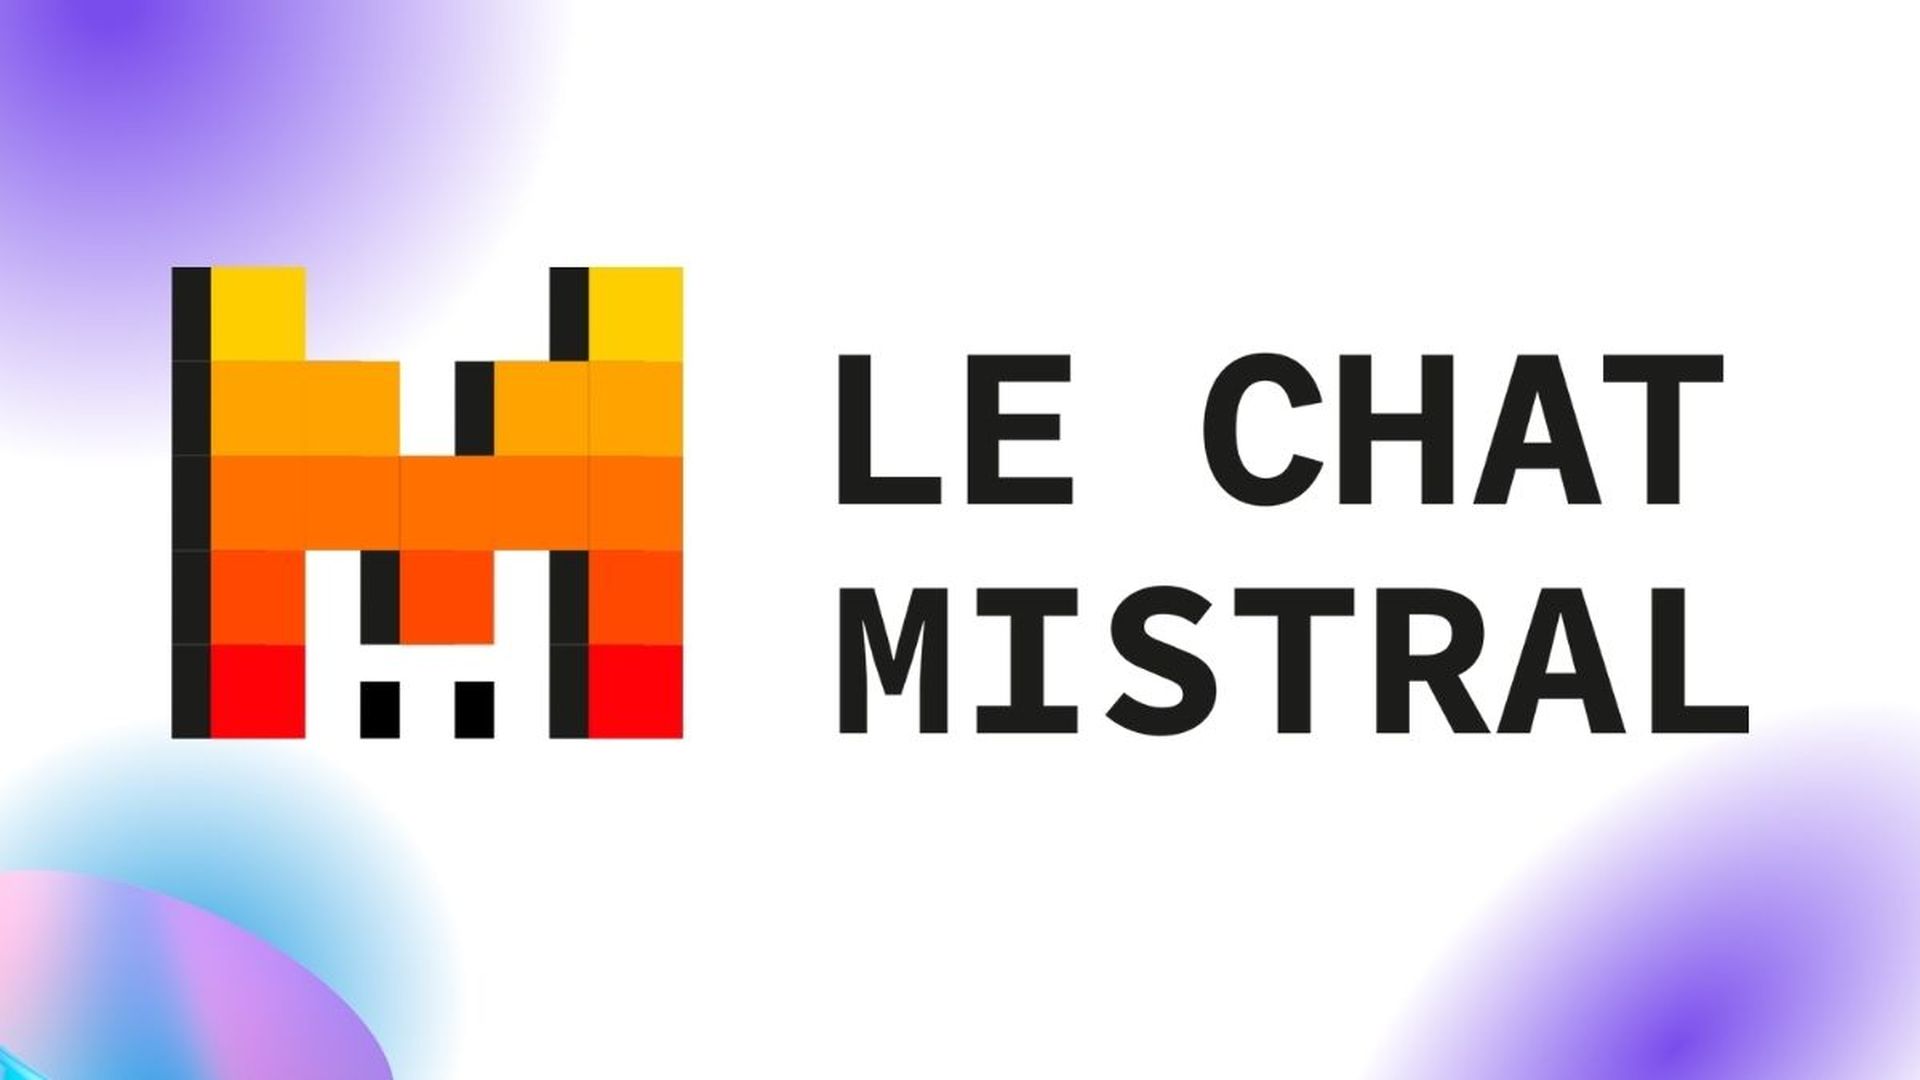 Can Le Chat Mistral be the ChatGPT killer?